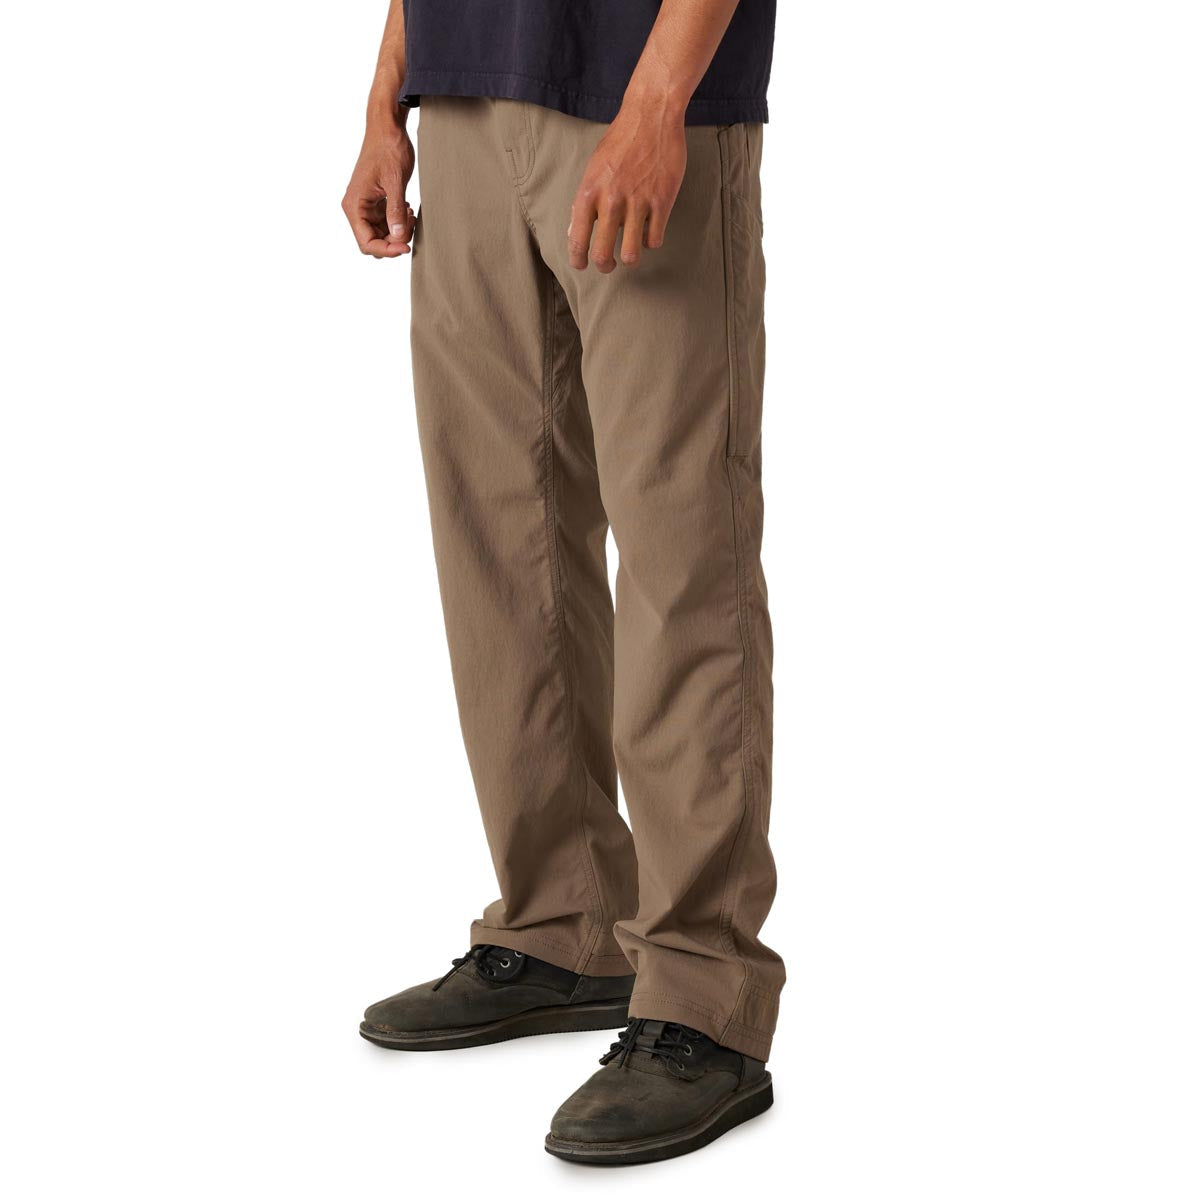 686 Everywhere Unwork Relaxed Fit Pants - Tobacco image 1